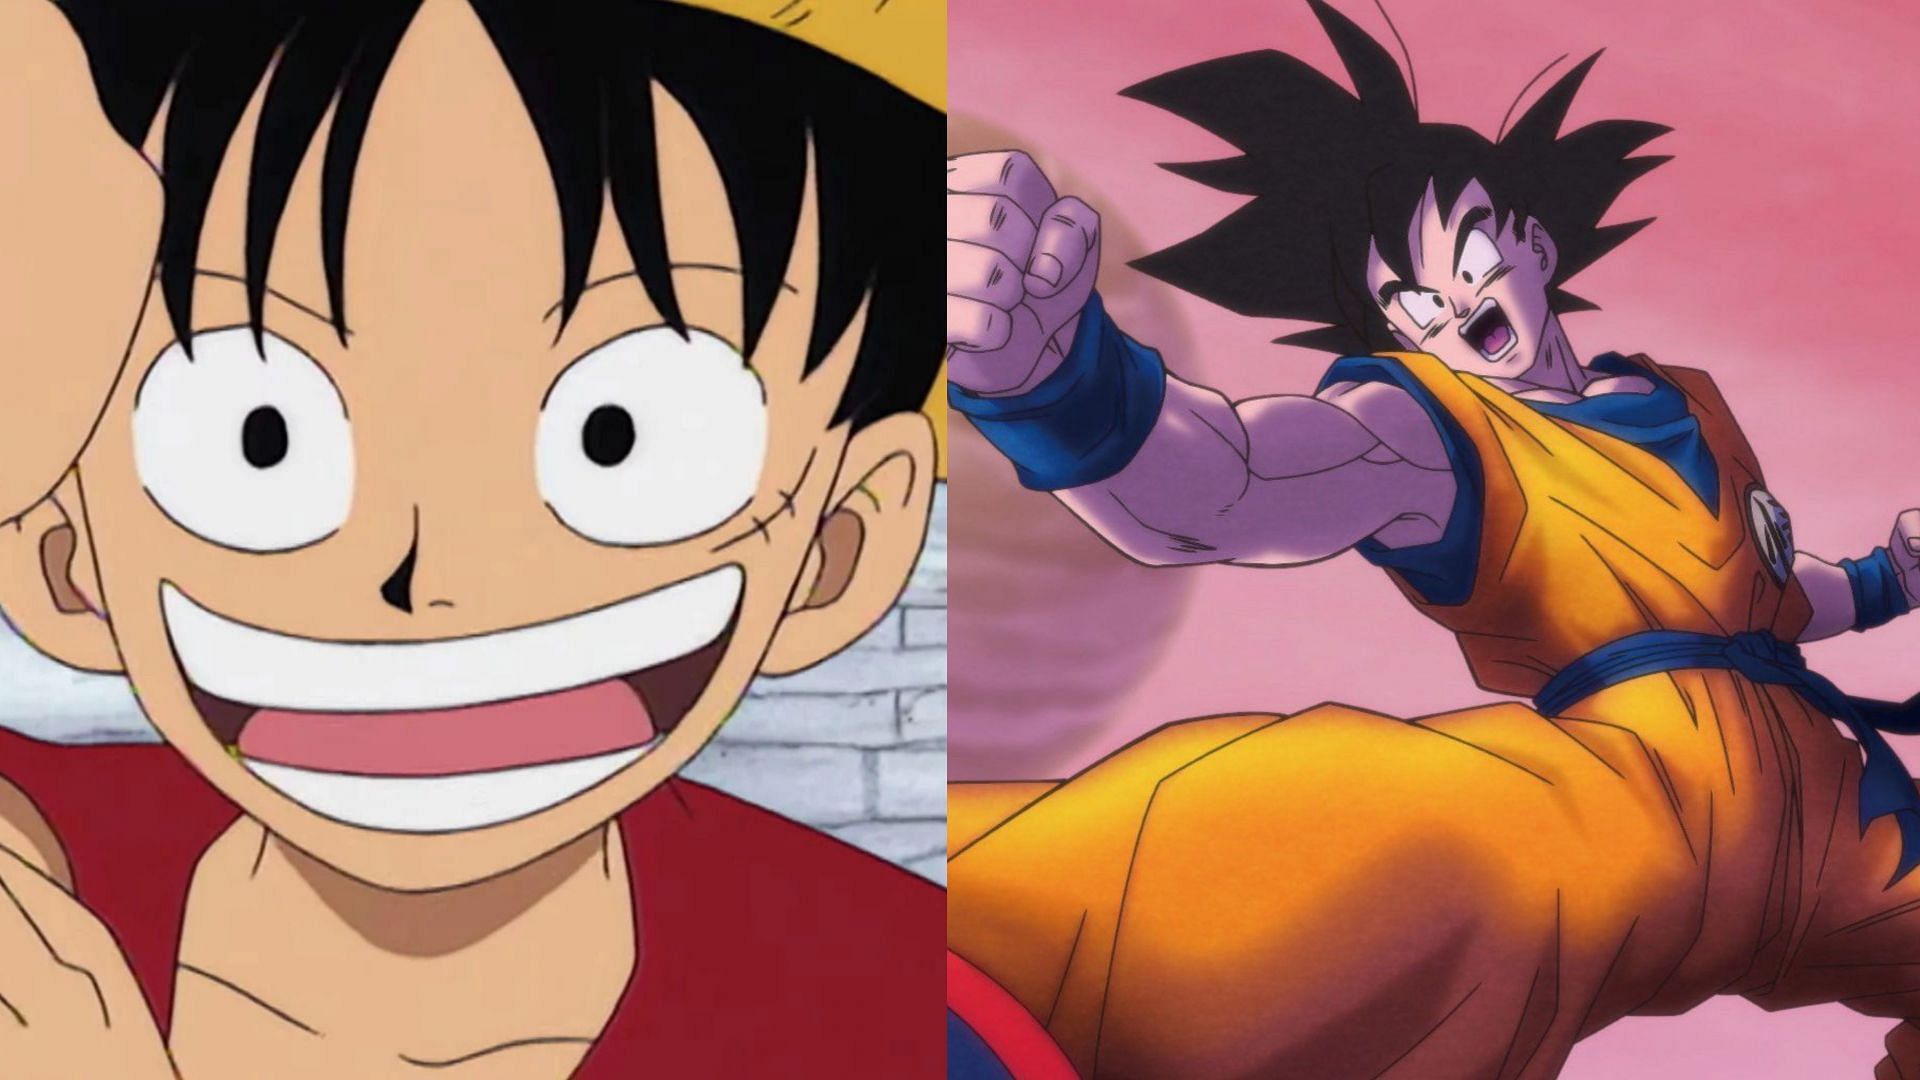 Luffy was directly inspired by Goku (Image via Toei Animation)